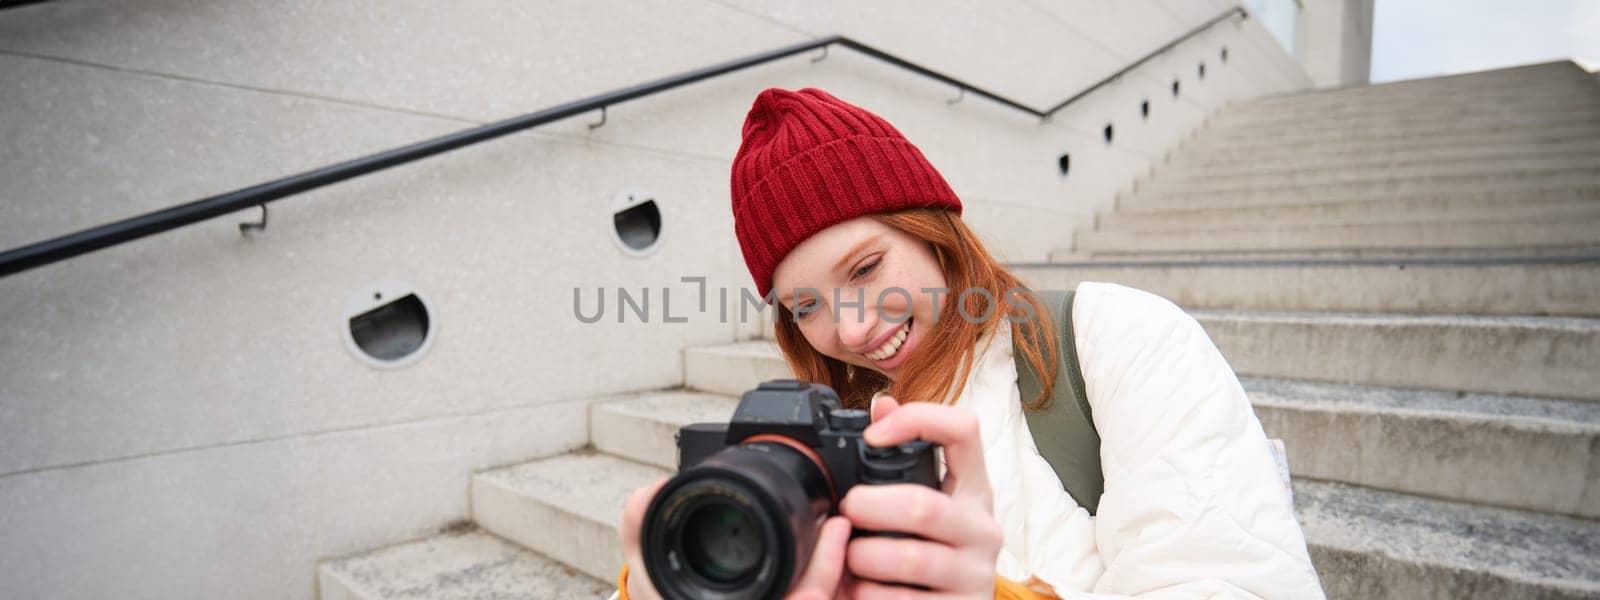 Portrait of female photographer walking around city with professional camera, taking pictures capturing urban shots, photographing outdoors.